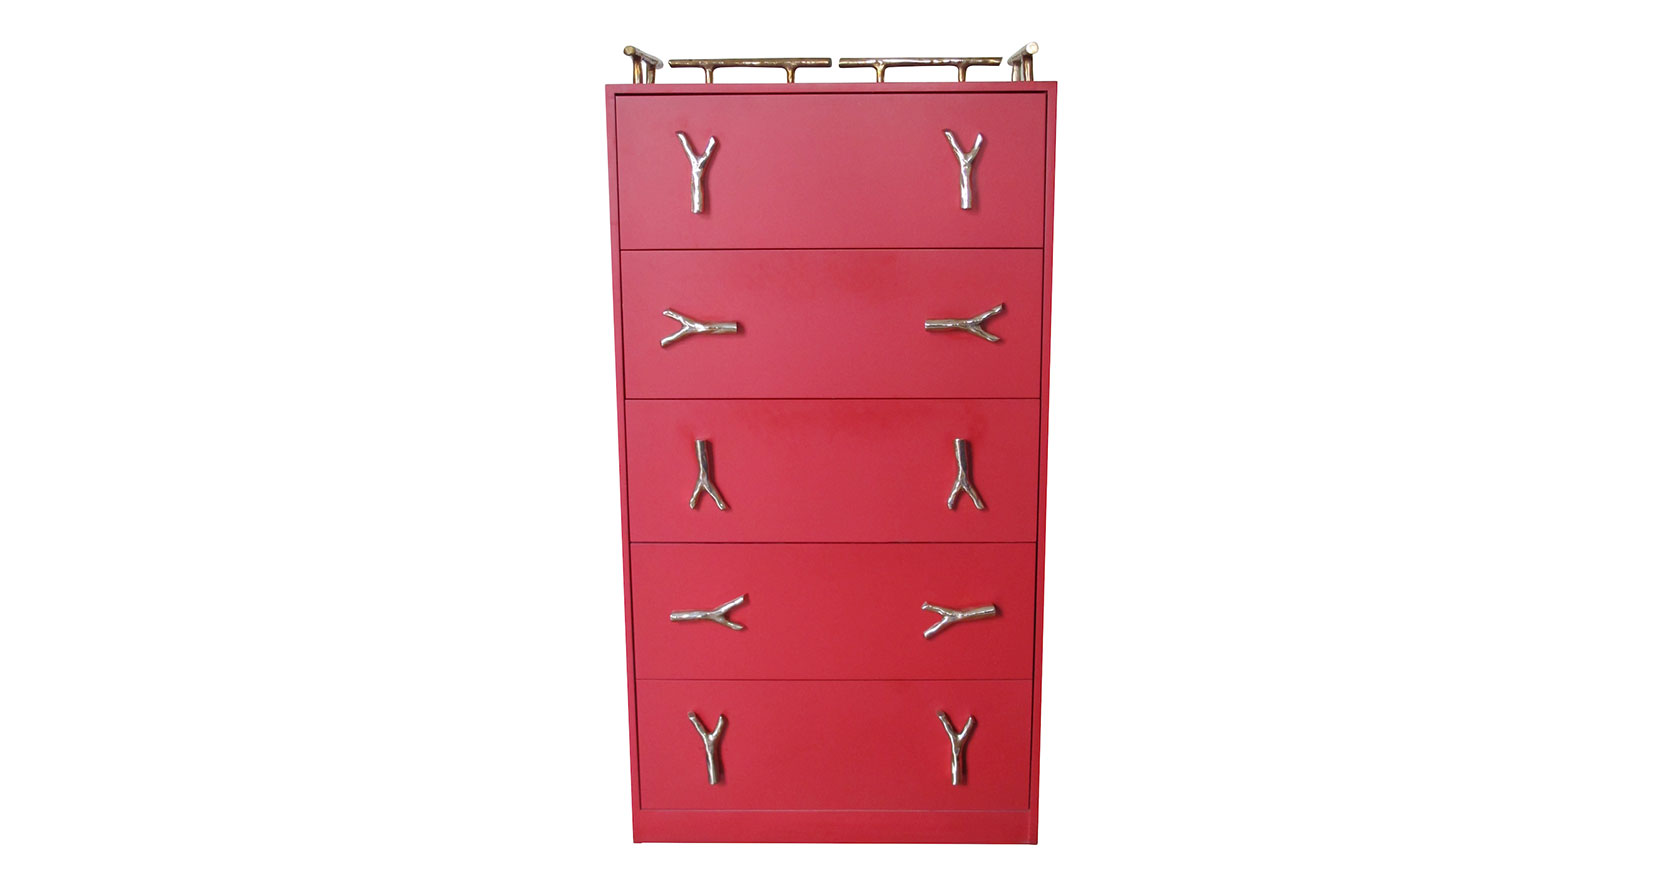 Garouste Bonetti, high rectangular red lacquered baroque storage unit, 5 drawers each with two gilt handles in the shape of forks, top surrounded by 4 rails in gilt bronze